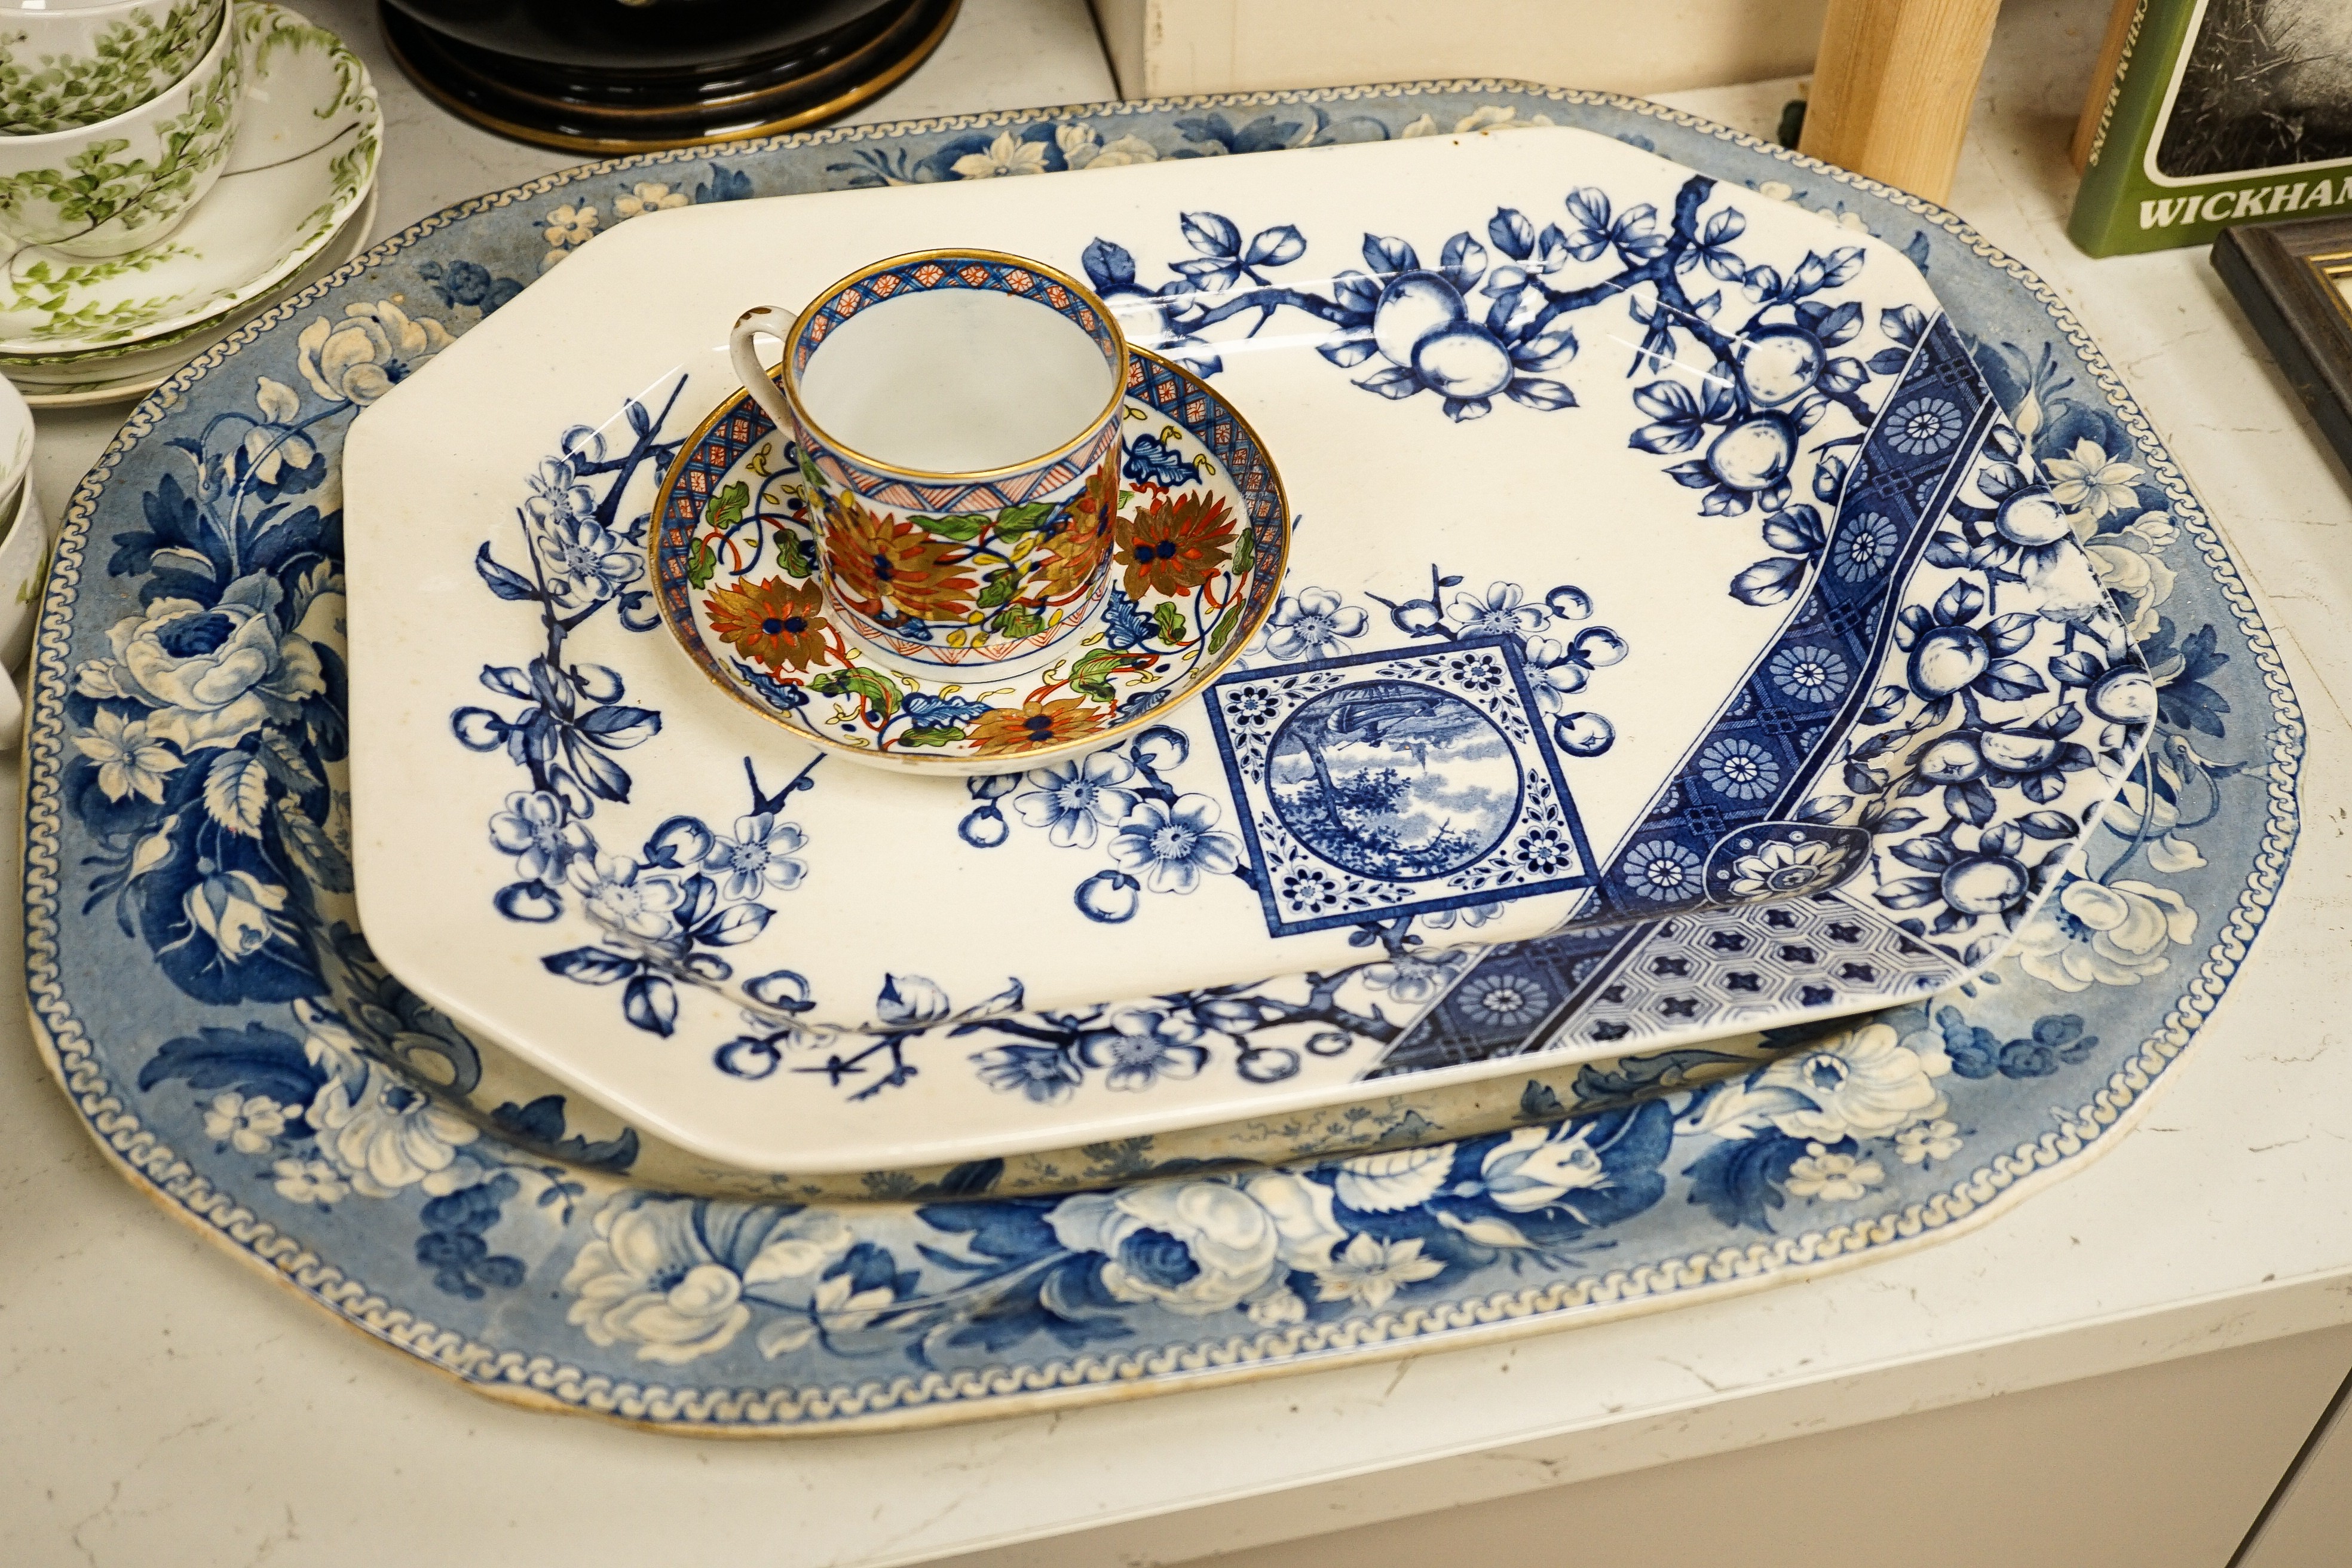 A 19th century enamel pottery jardiniere, Chinese jar and cover, a Copelands hand painted tea set, 2 blue and white meat platters, a Imari style cup and saucer etc. Jardiniere 19 cms, high.